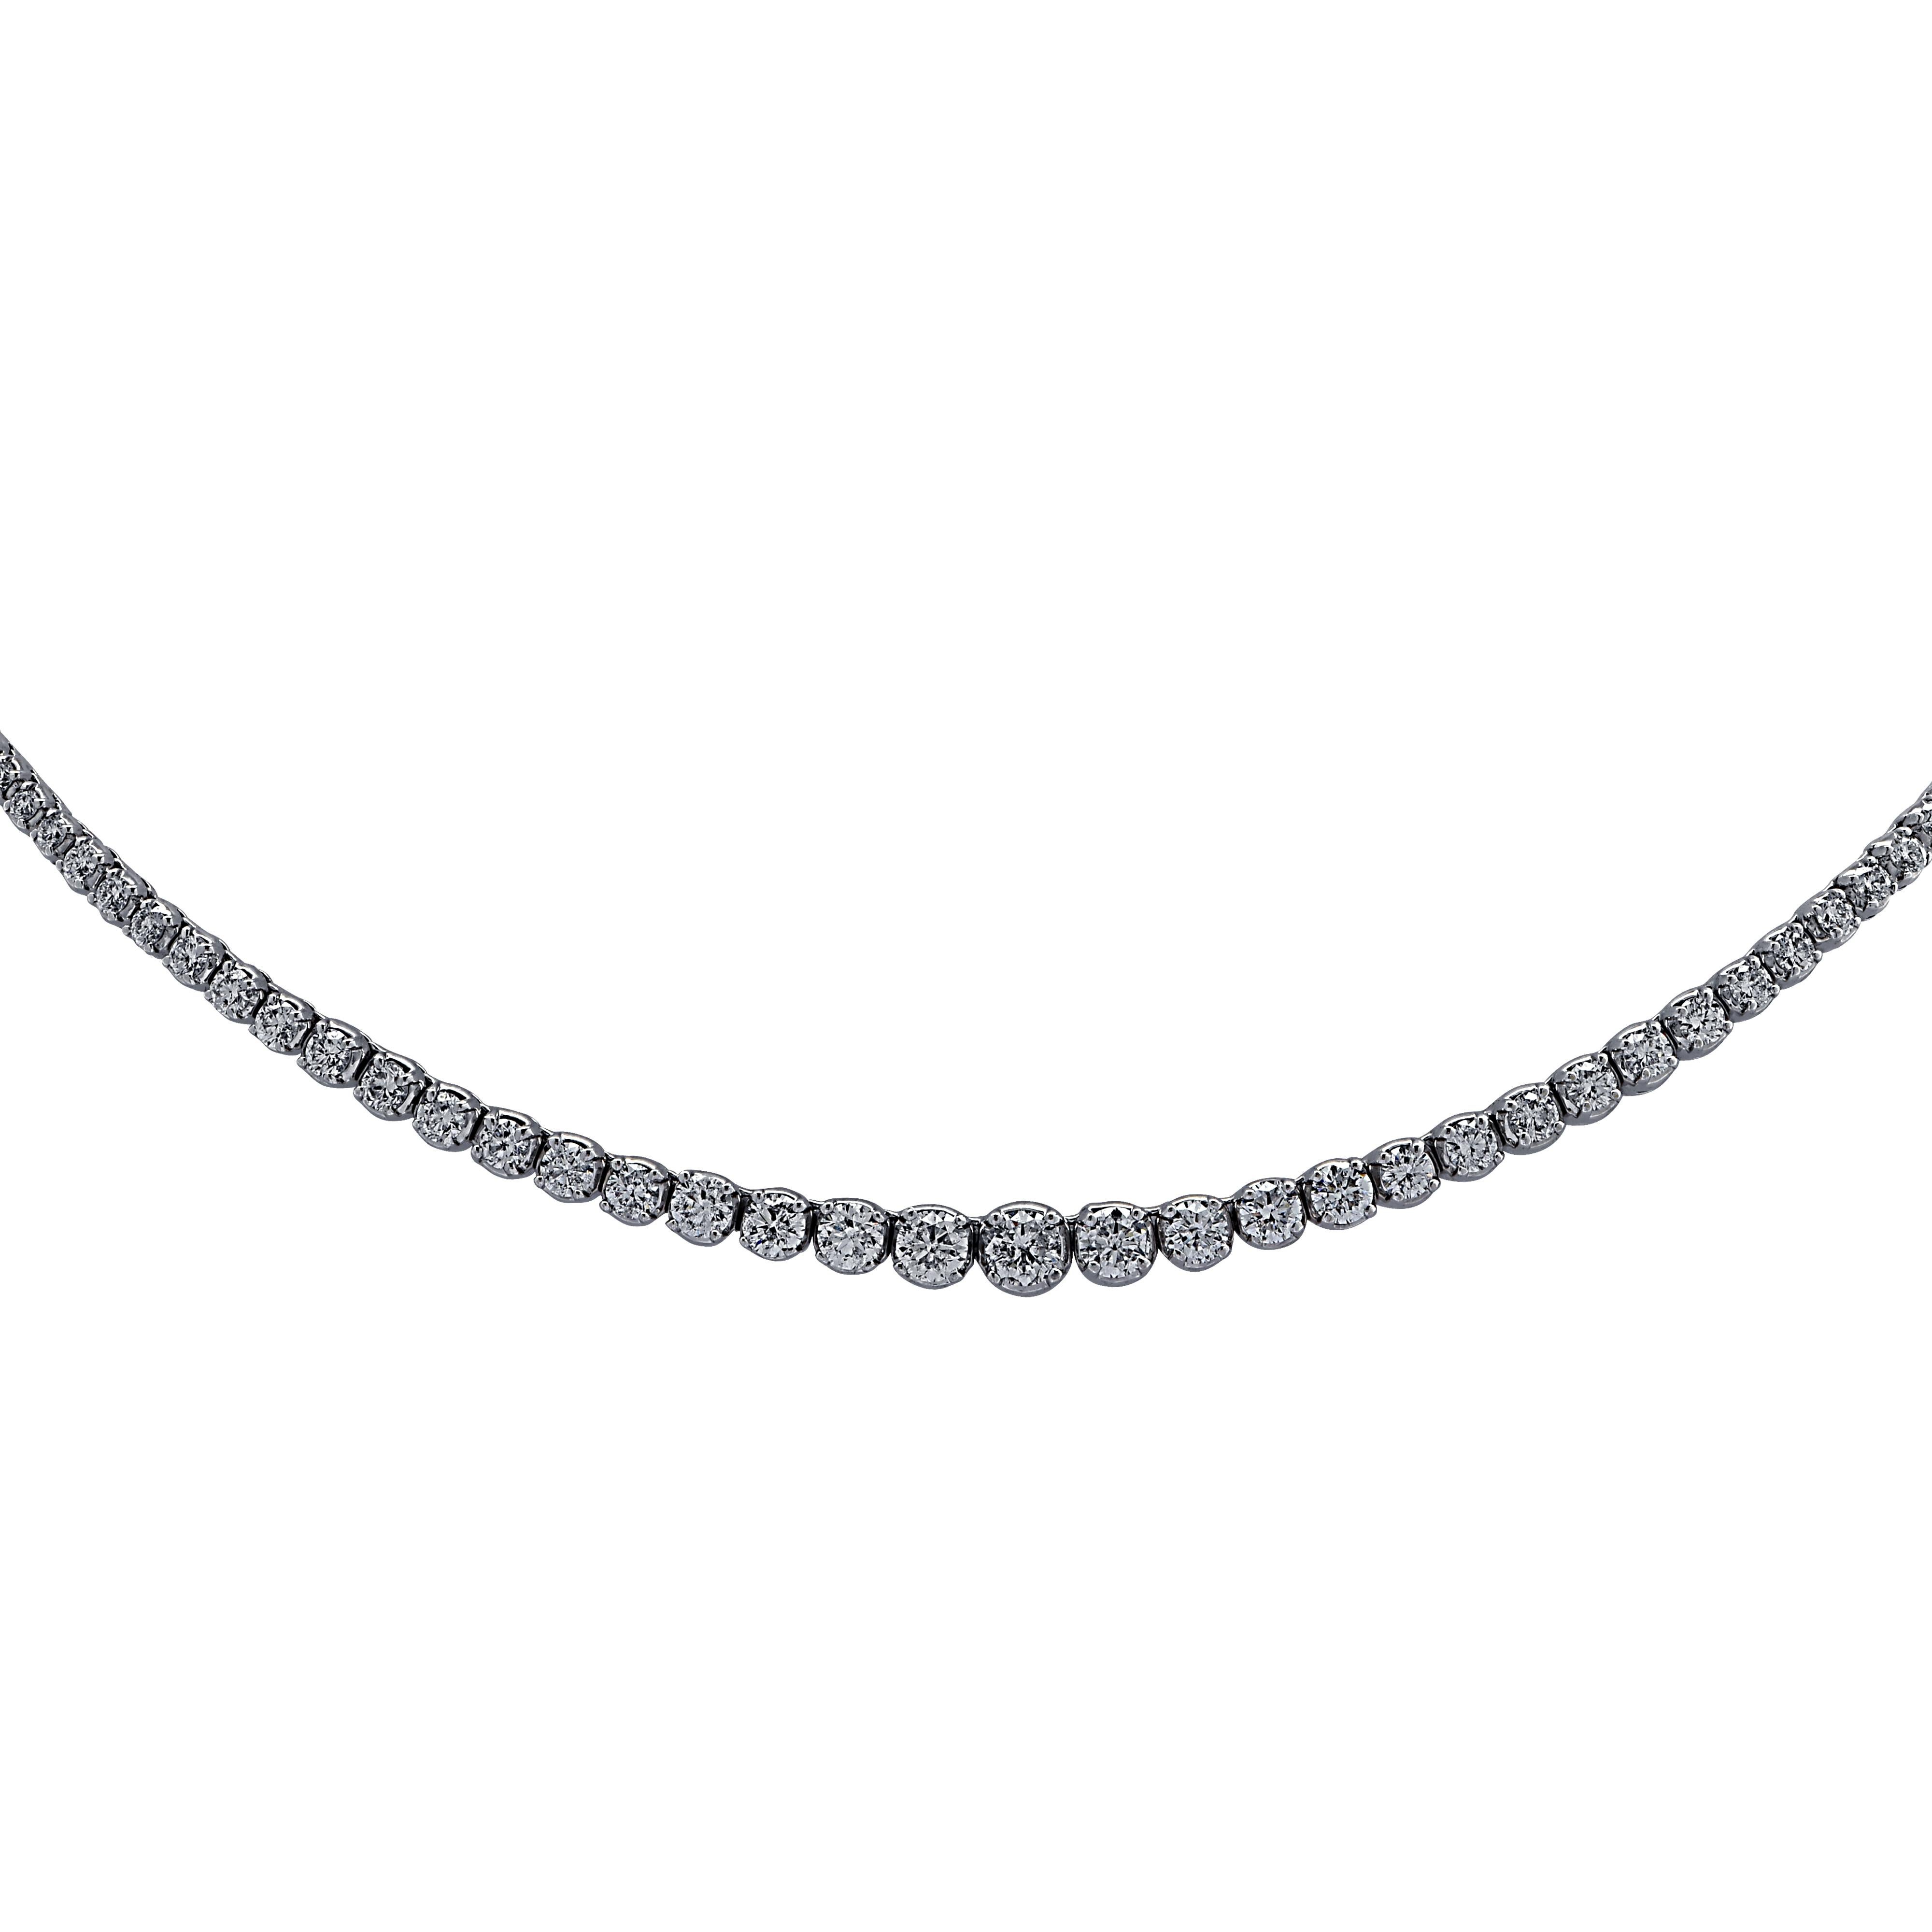 Exquisite diamond necklace crafted in White Gold, showcasing 137 round brilliant cut diamonds weighing 6.5 carats total, G color, SI clarity. The diamonds are set in a seamless sea of eternity, creating a spectacular symphony of brilliance and fire.